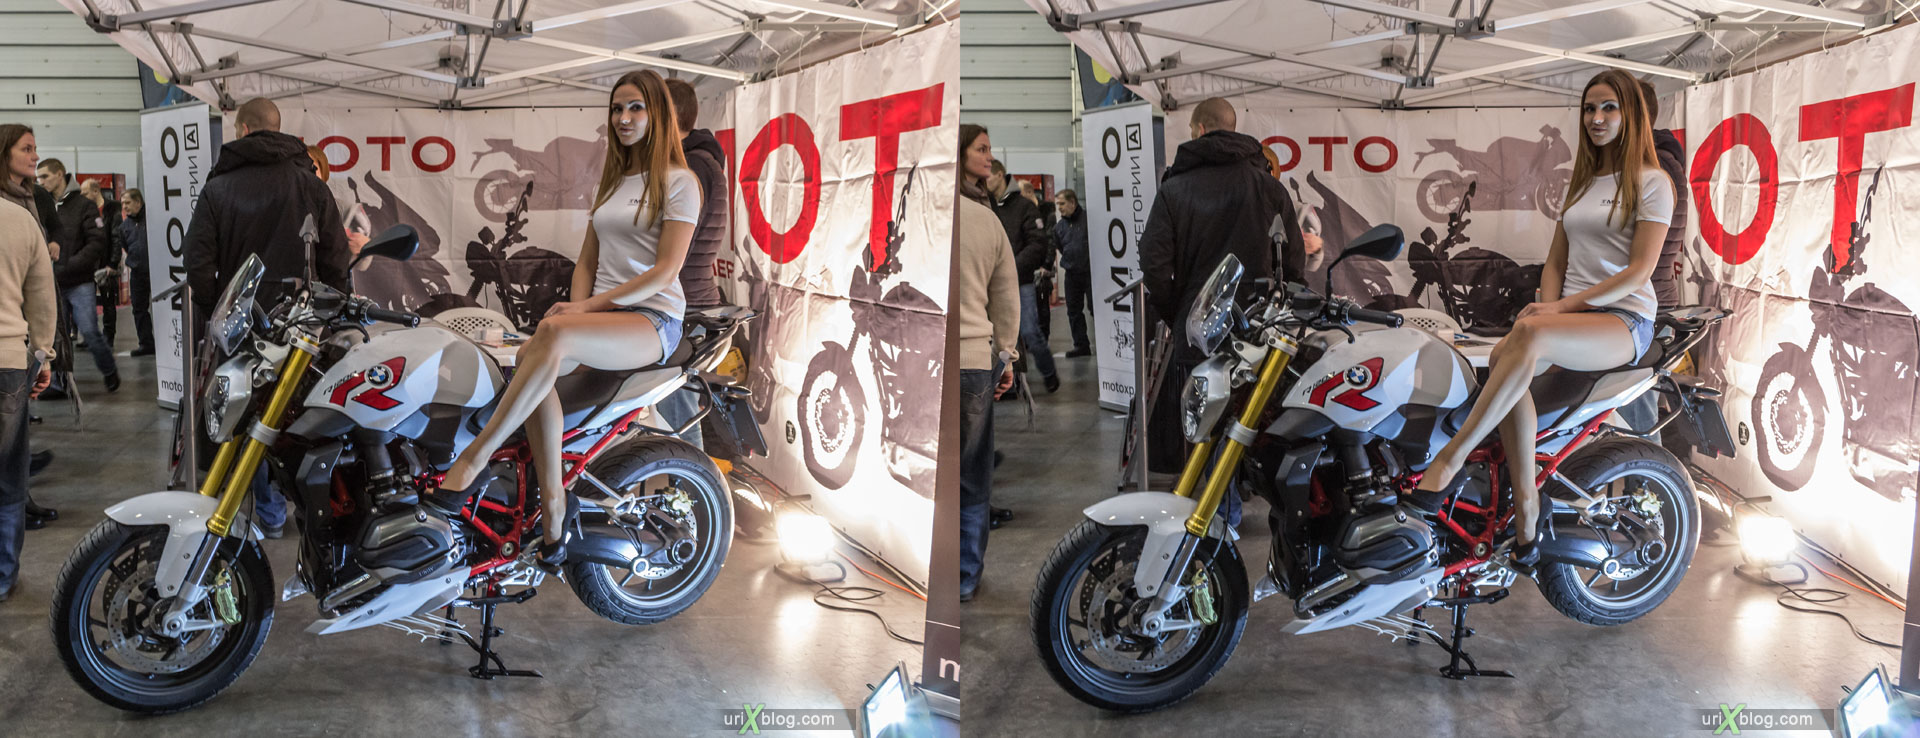 Moto park, exhibition, girl, model, Crocus Expo, Moscow, Russia, 3D, stereo pair, cross-eyed, crossview, cross view stereo pair, stereoscopic, 2015